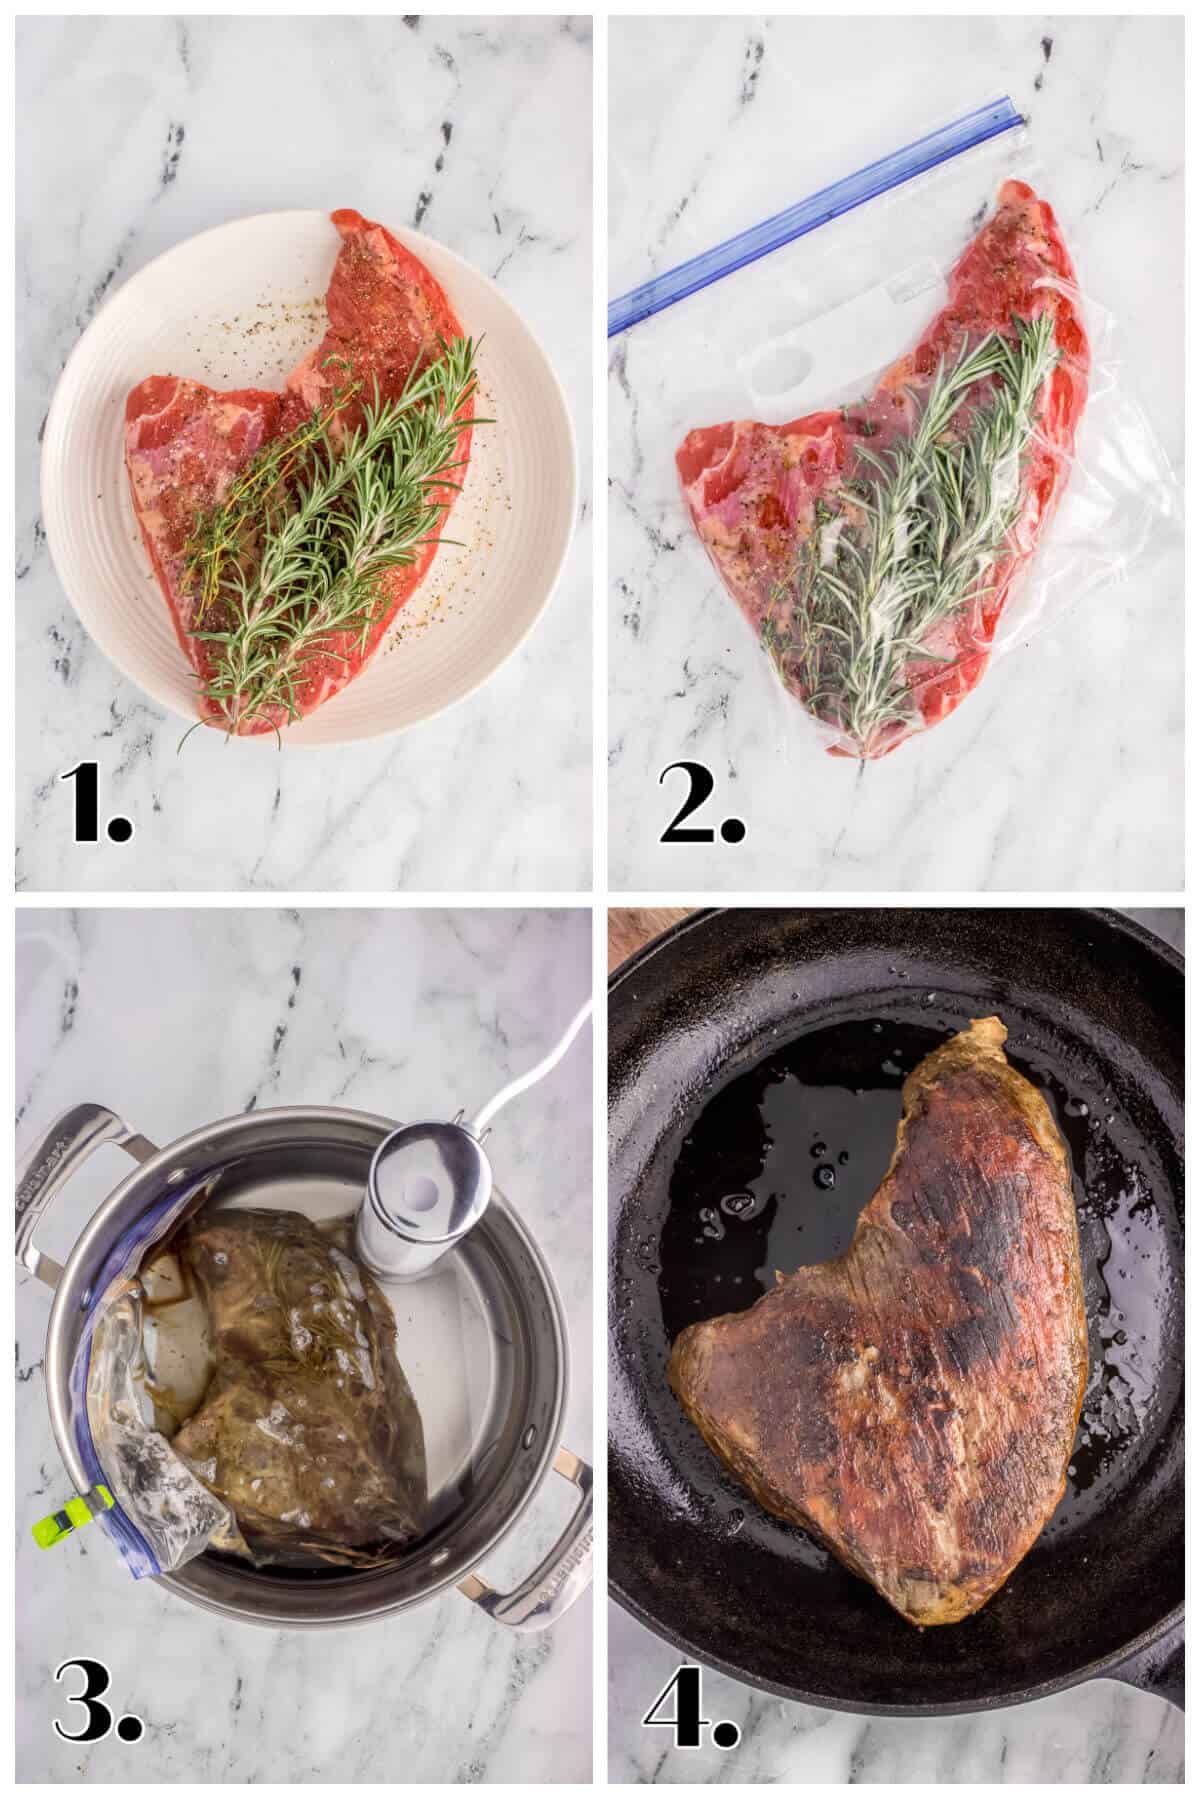 Four picture collage showing how to cook sous vide tri-tip. Season, bag, water bath, sear.